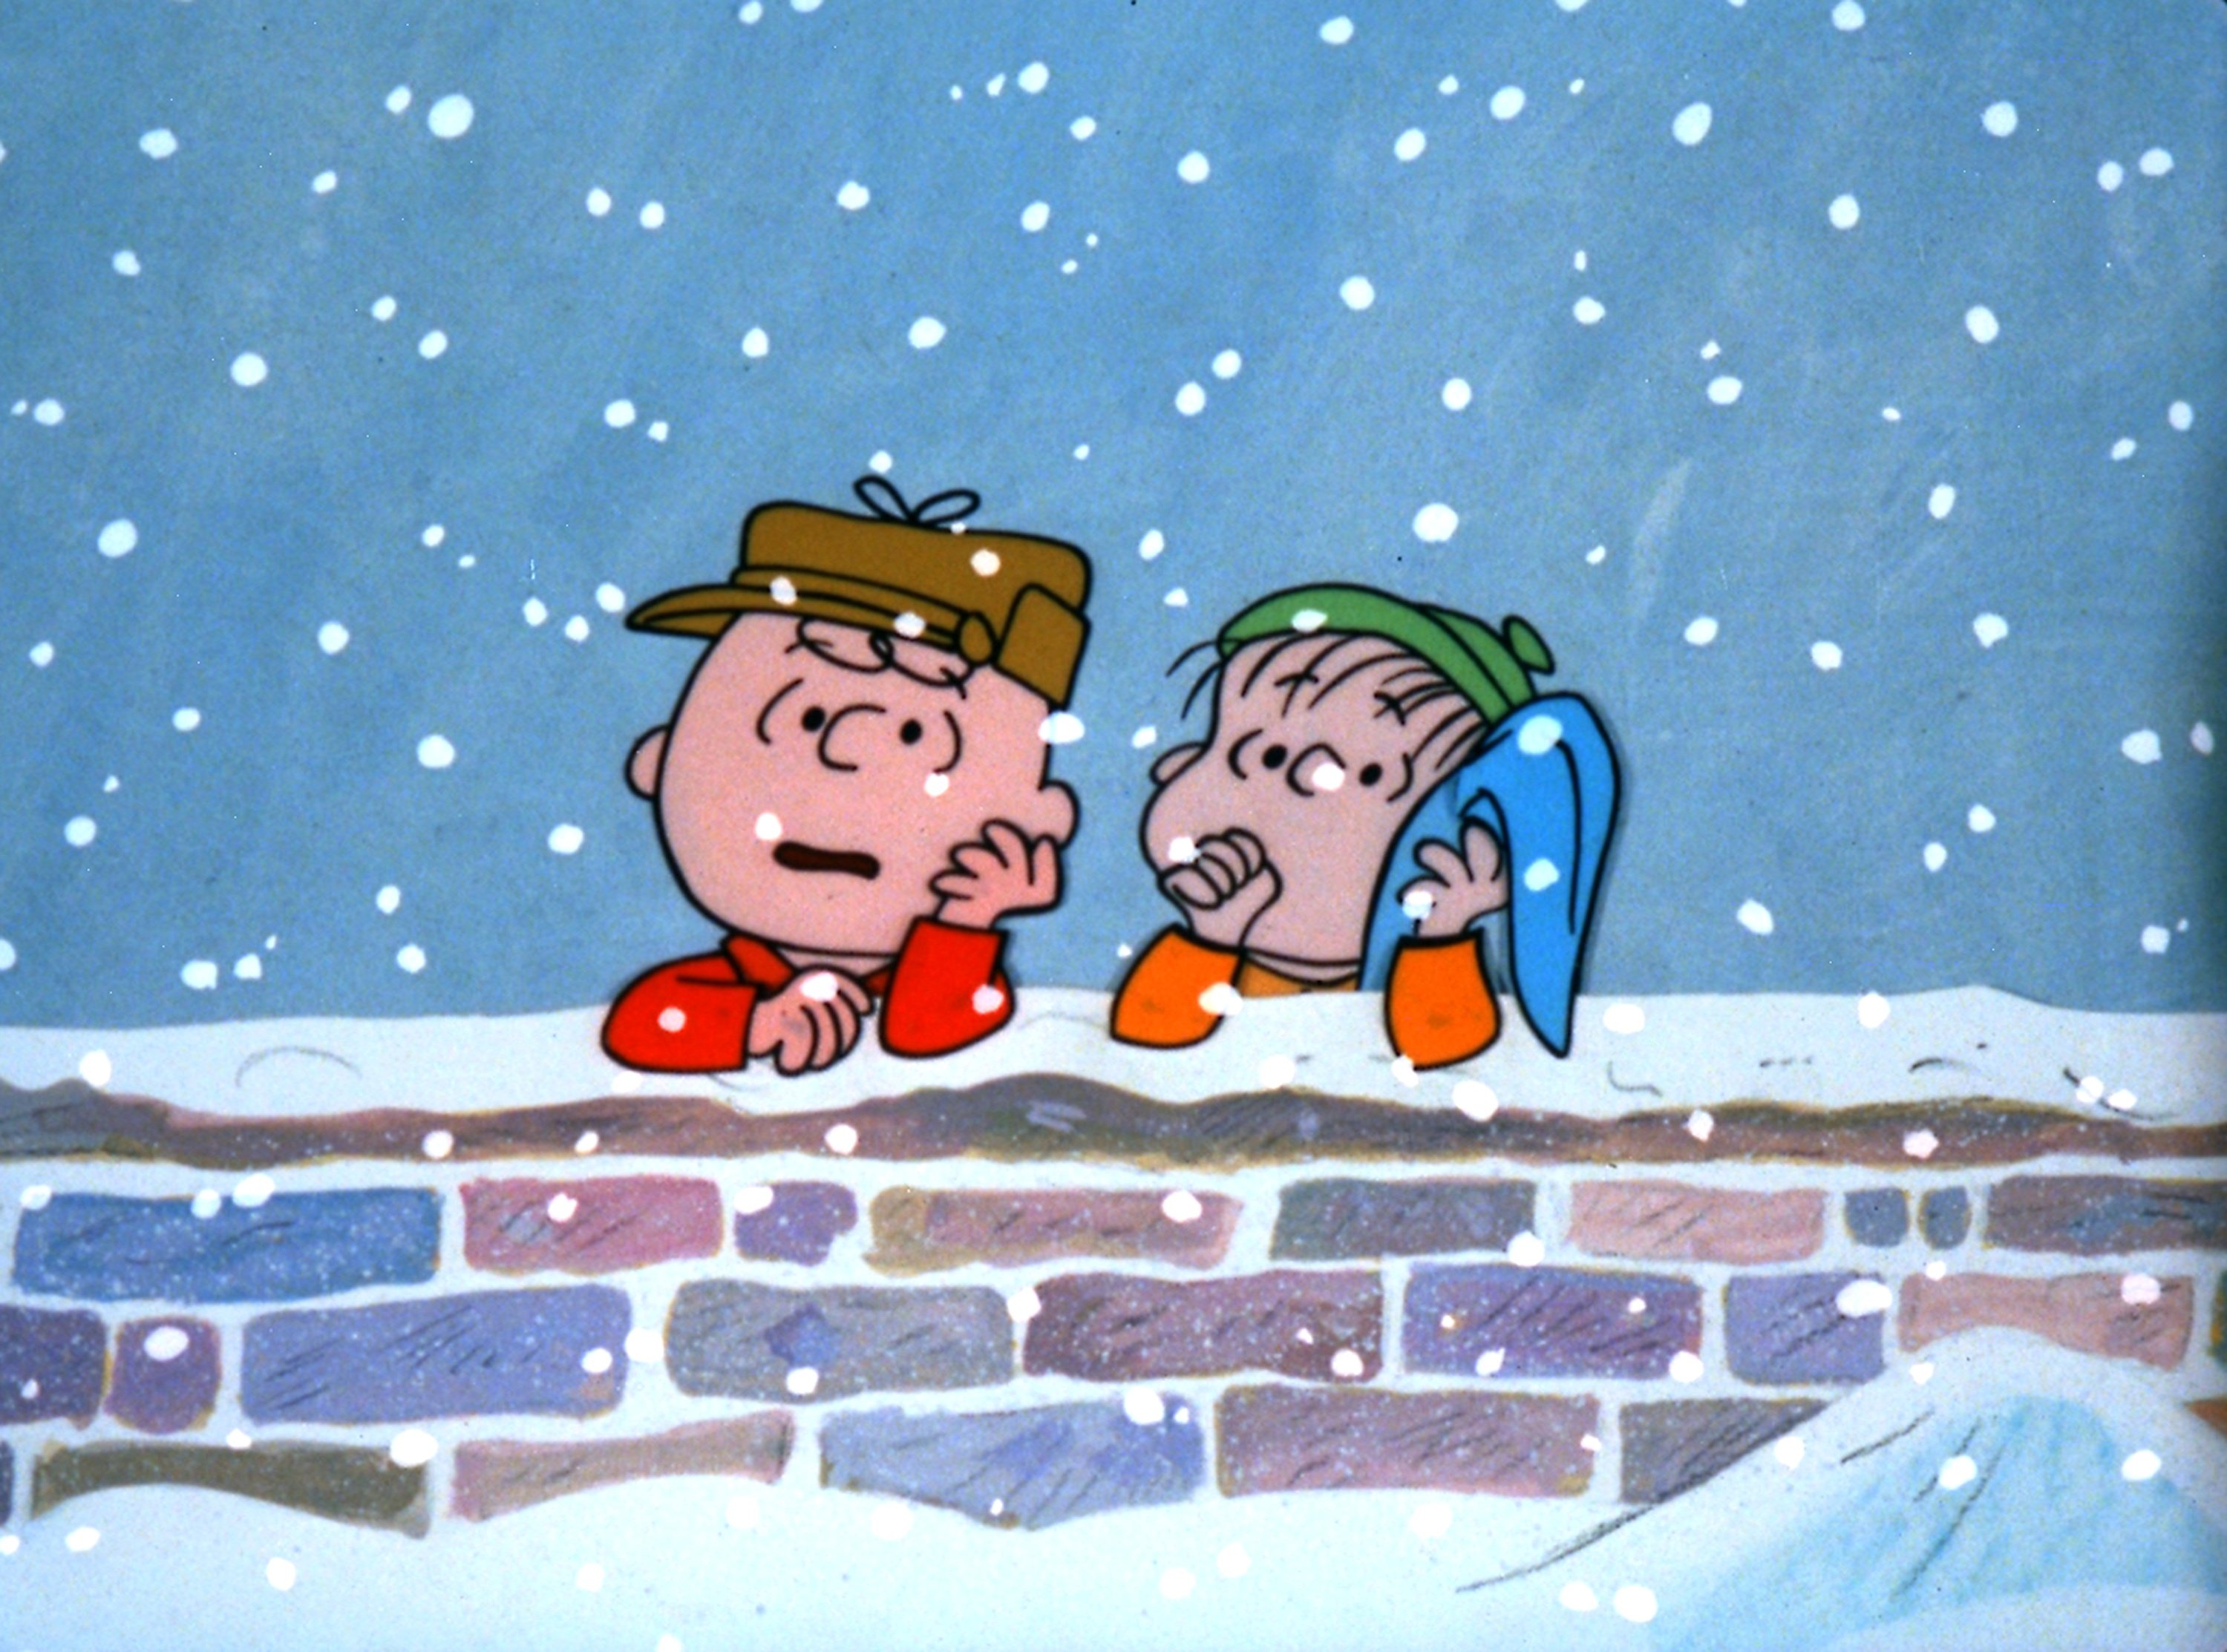 Charlie Brown and Linus Van Pelt leaning on a brick wall in the snow in 'A Charlie Brown Christmas'